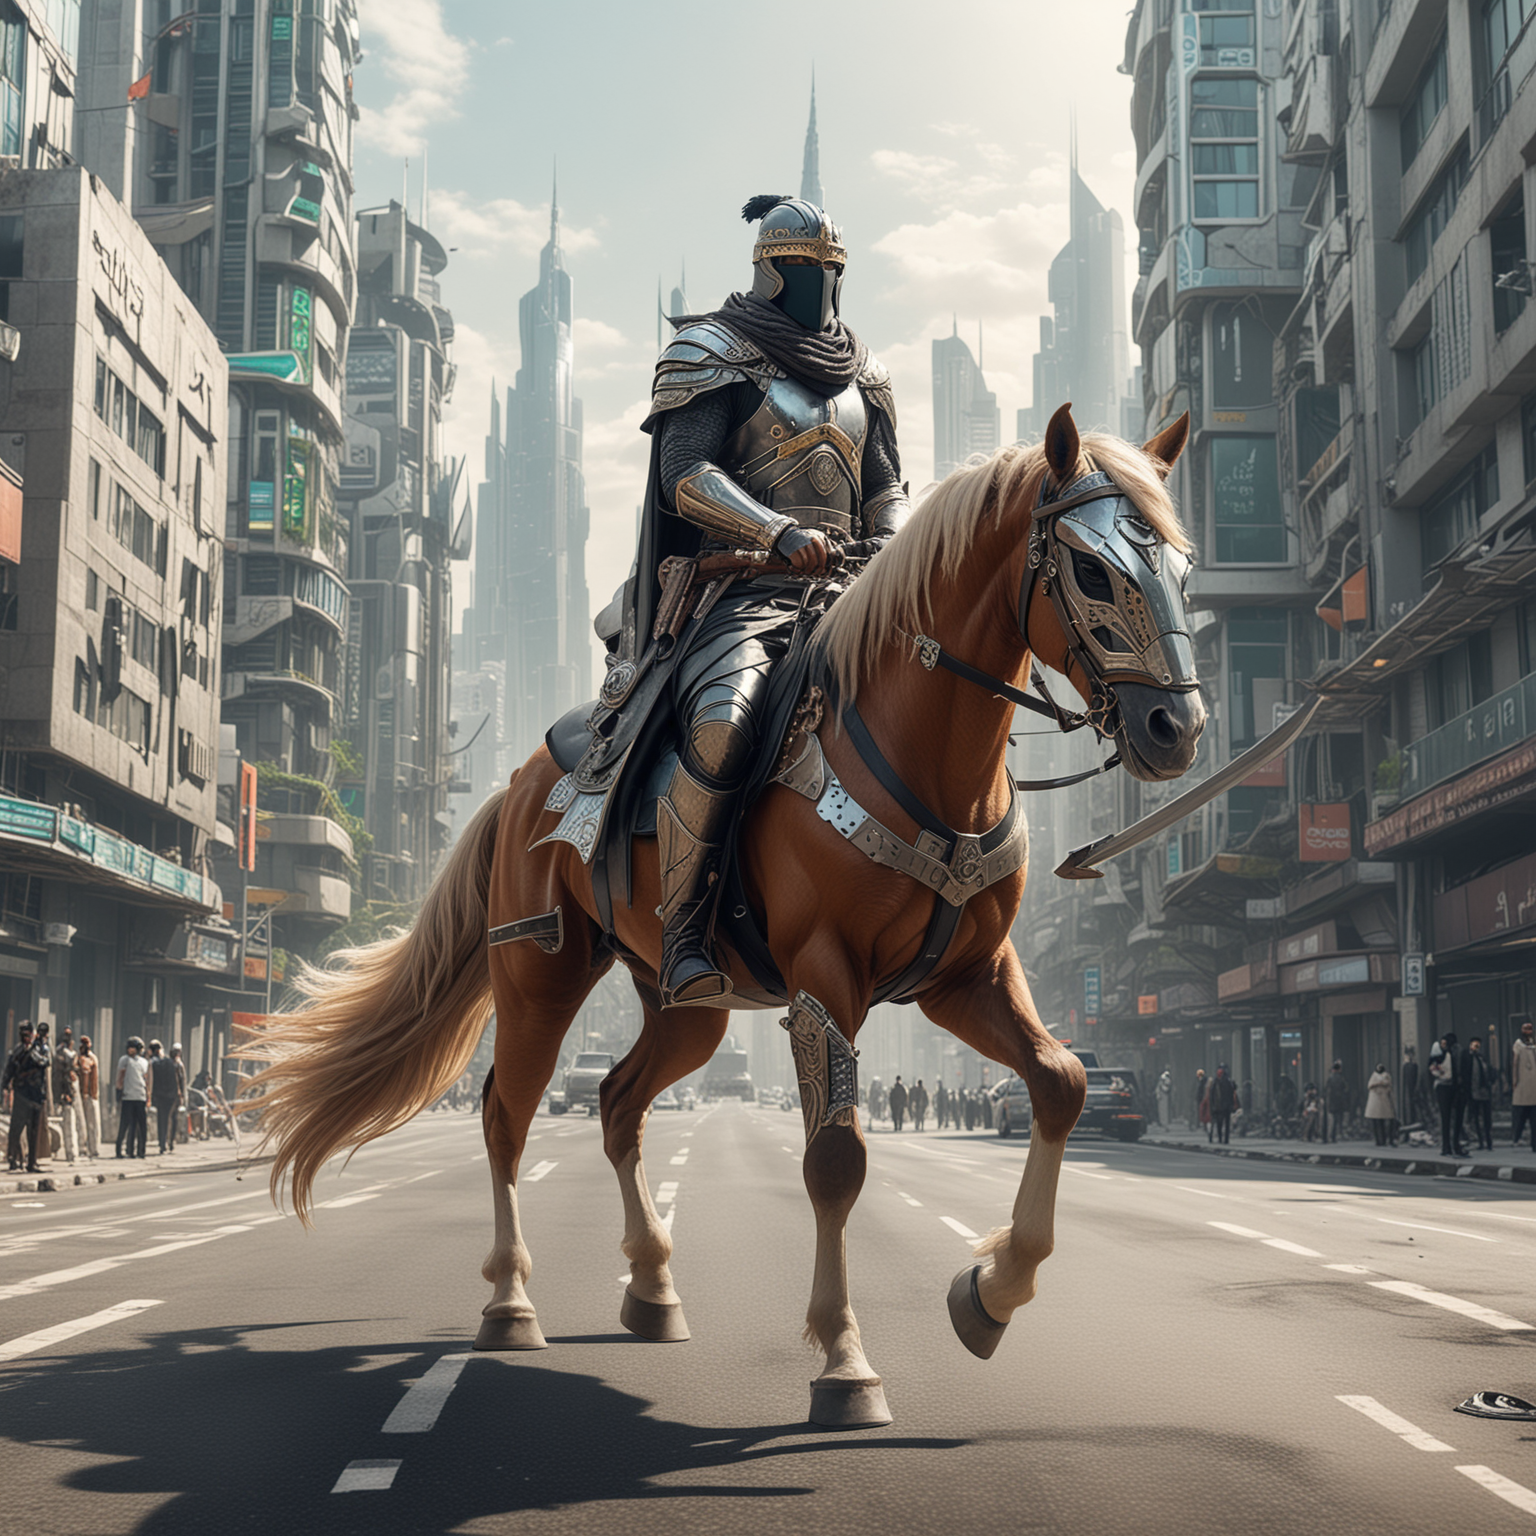 A Muslim king horse riding in the road of an eco-friendly futuristic city, wearing a nice helmet, with a futuristic sword on his belt, and his face covered with a mask that resembles a falcon